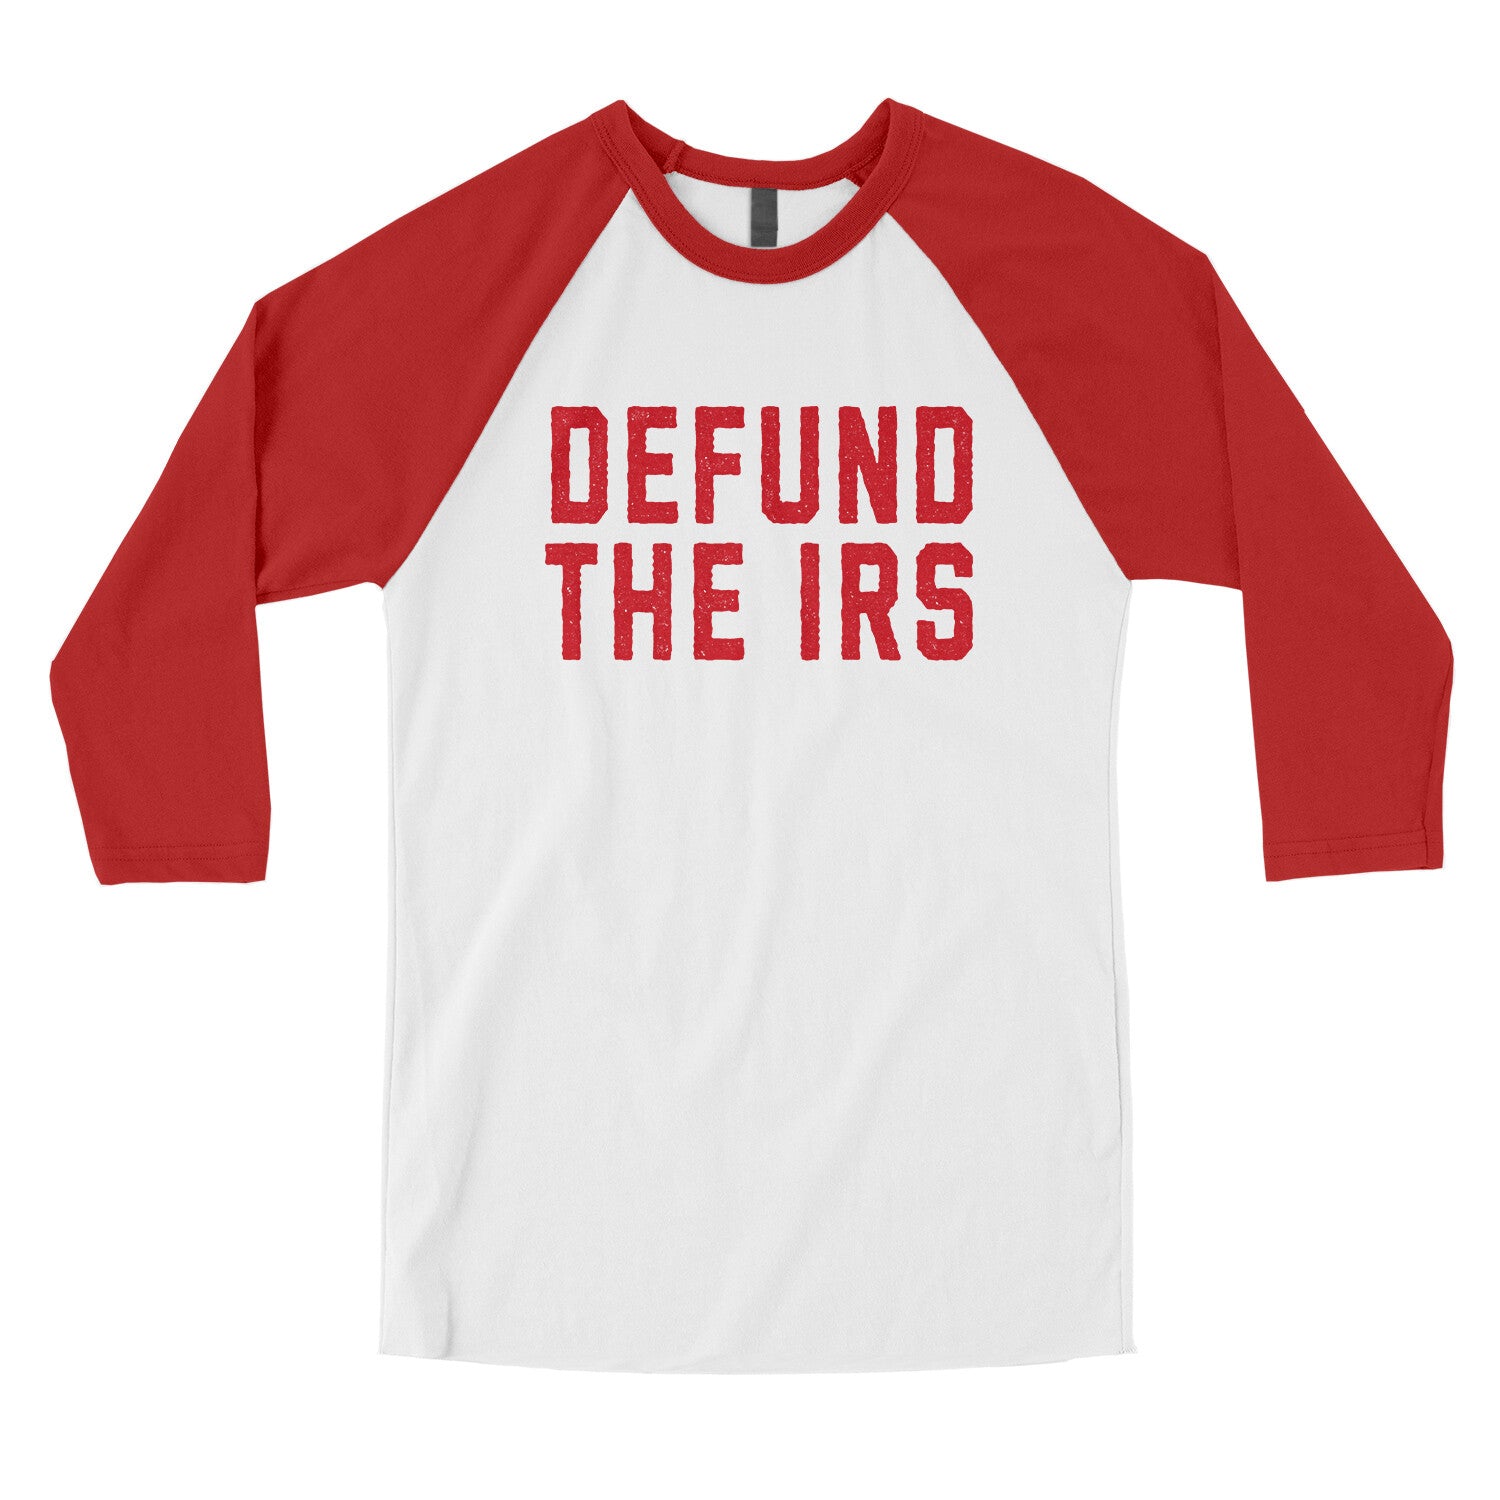 Defund the IRS in White with Red Color